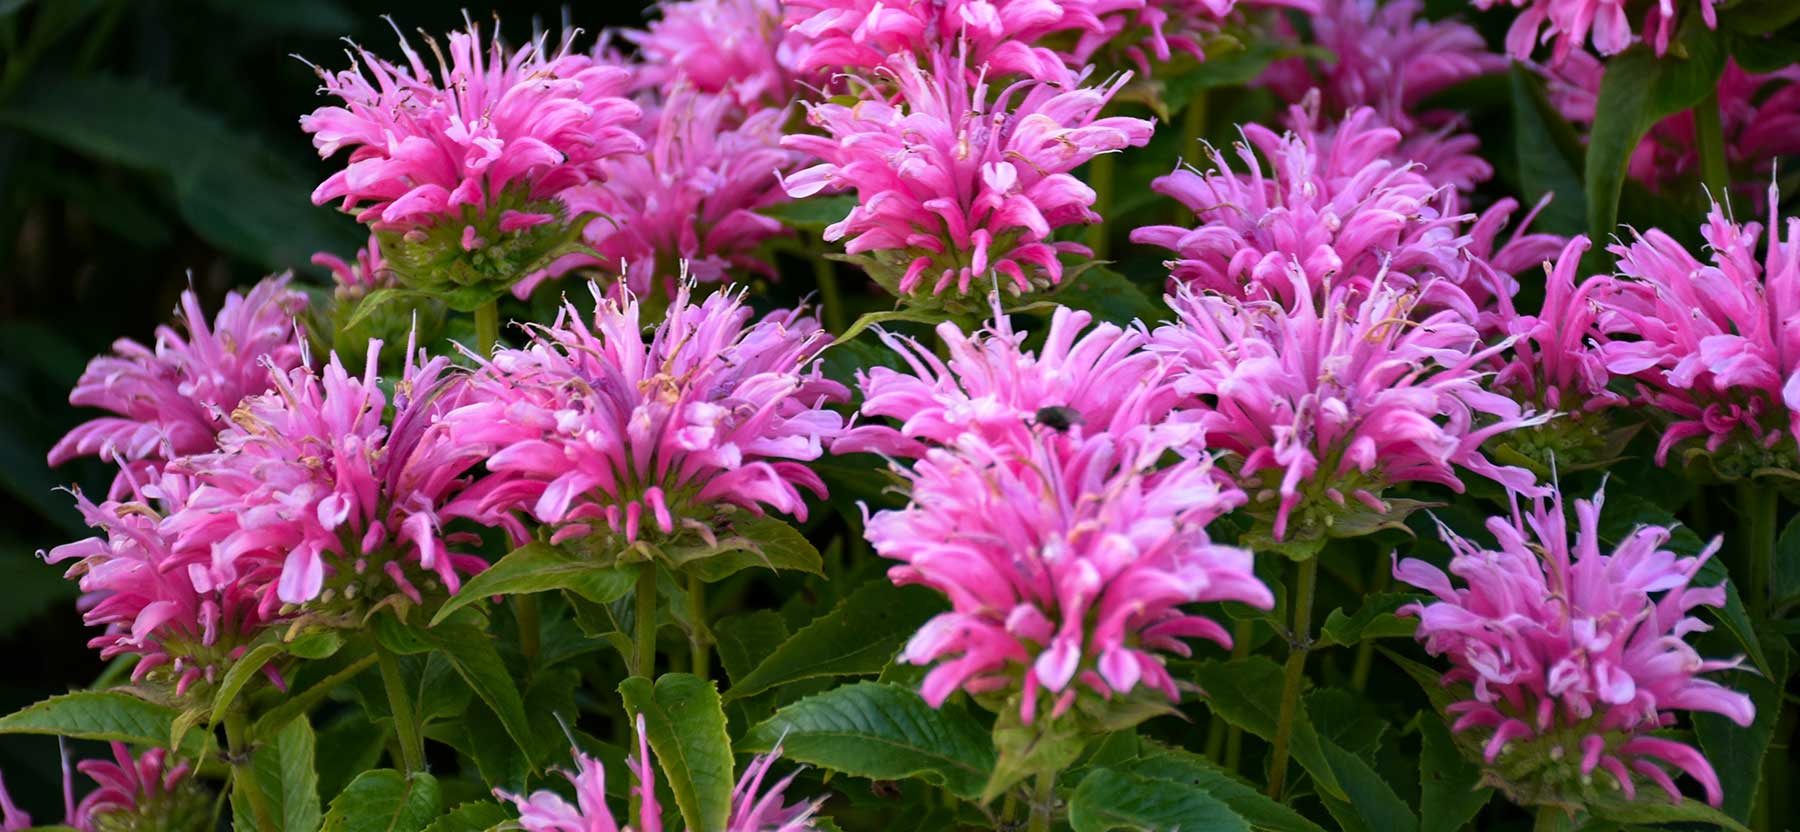 The bee balm plant is a North American native perennial herb. Bee balm is very attractive to bees, butterflies, and hummingbirds. The bee balm flower has an open, daisy-like shape, with tubular petals in shades of red, pink, purple, and white.